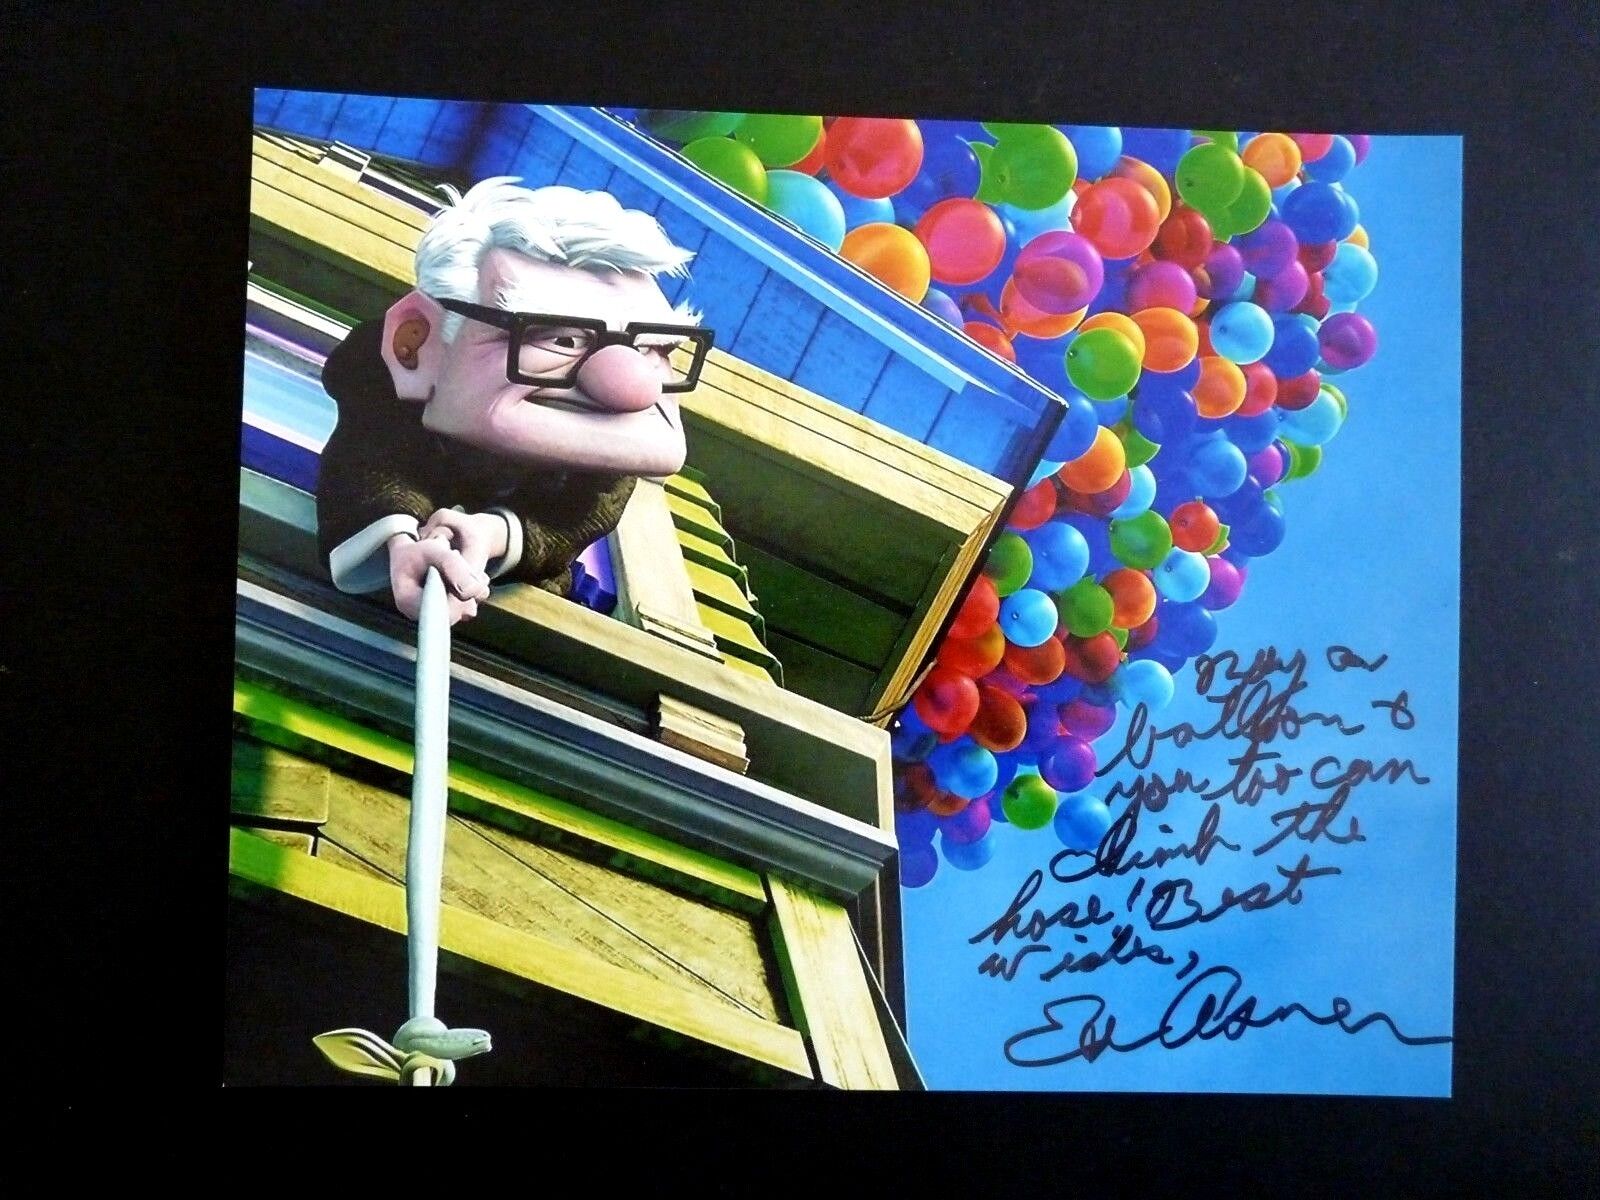 Ed Asner UP Signed Autographed 8x10 Photo Poster painting W/ Inscription Beckett BAS Certified 2